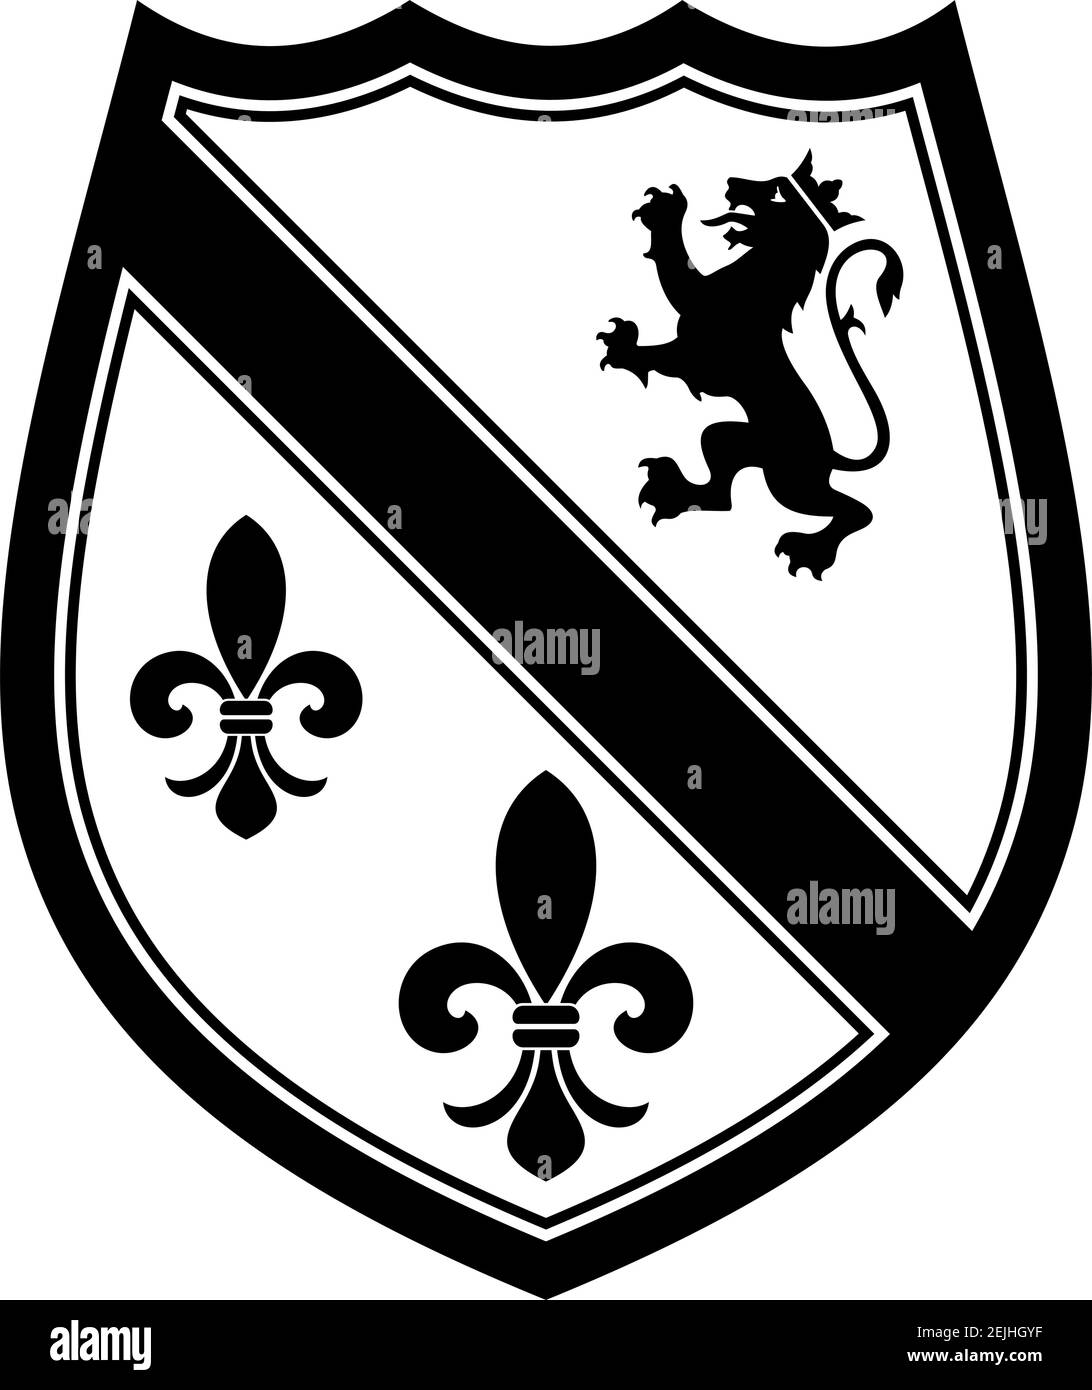 Knight Shield in black and white on white isolated background. Black and white Vector Illustration of a simple Wappon shield. Stock Vector